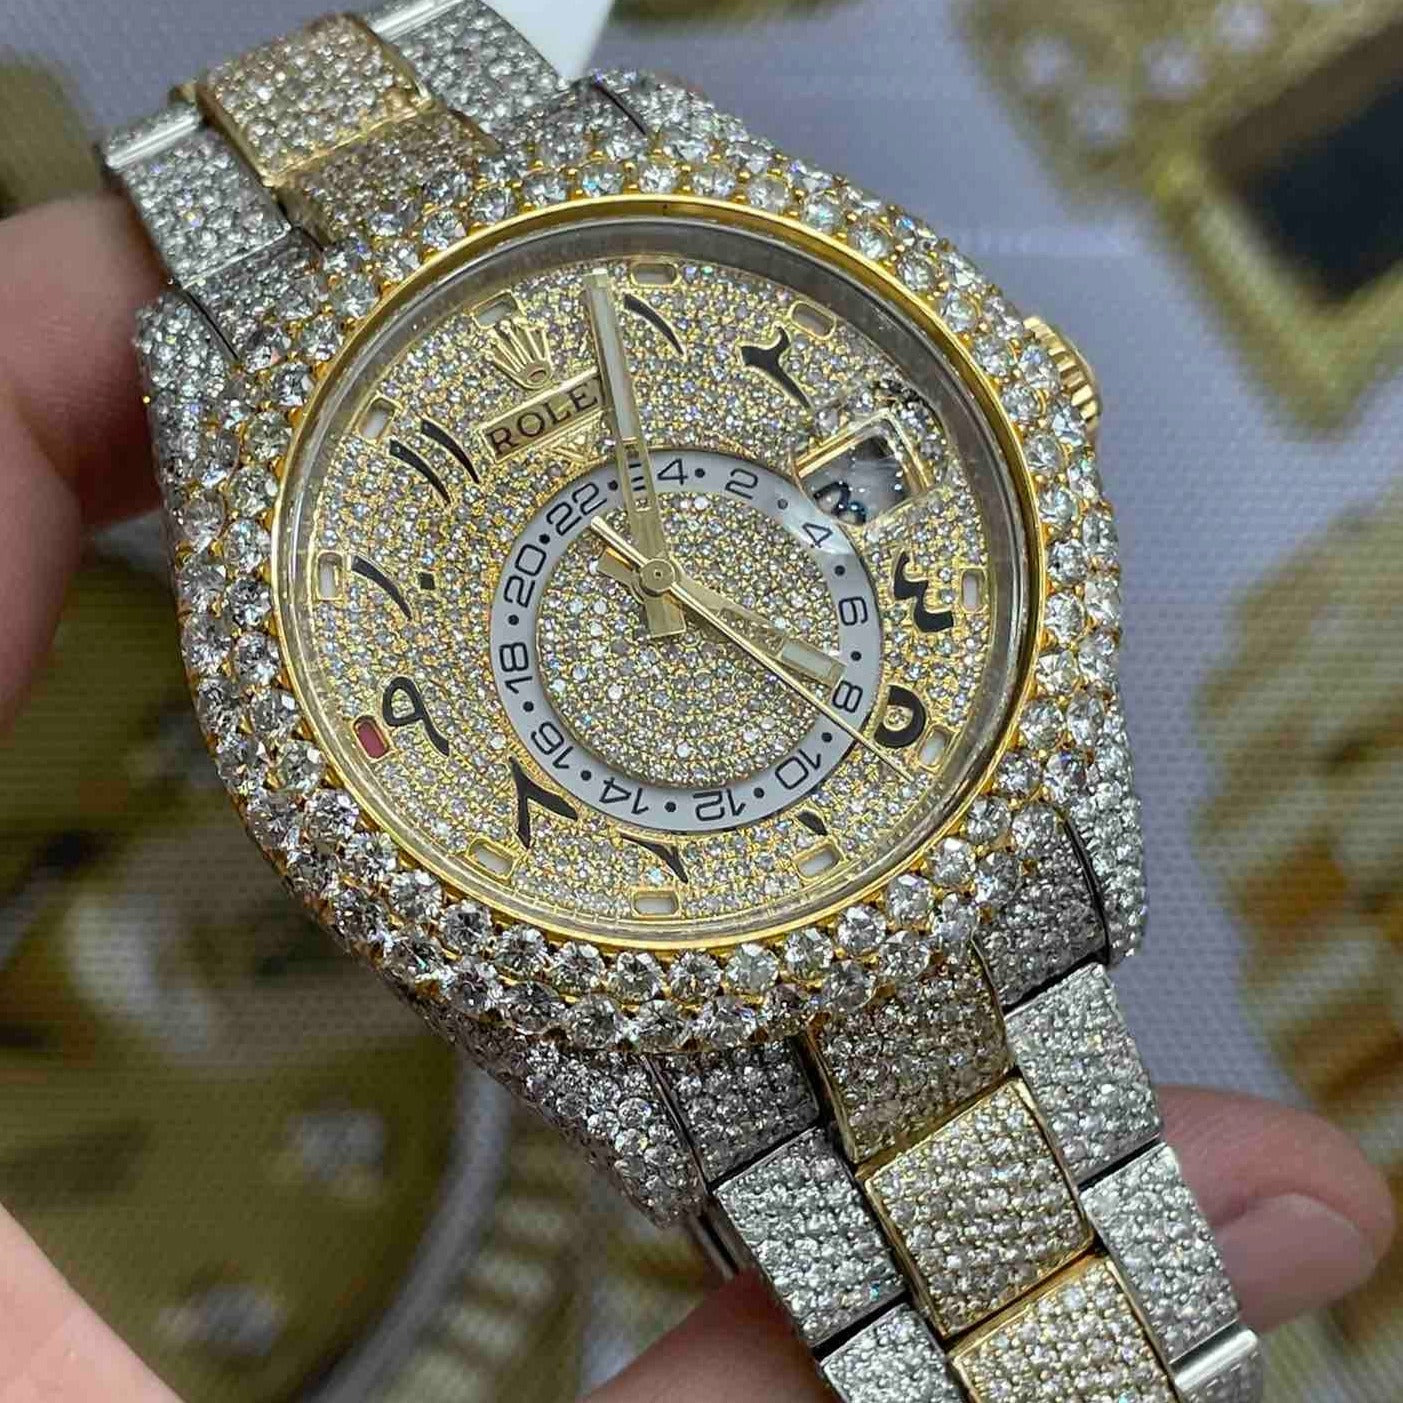 most expensive rolex